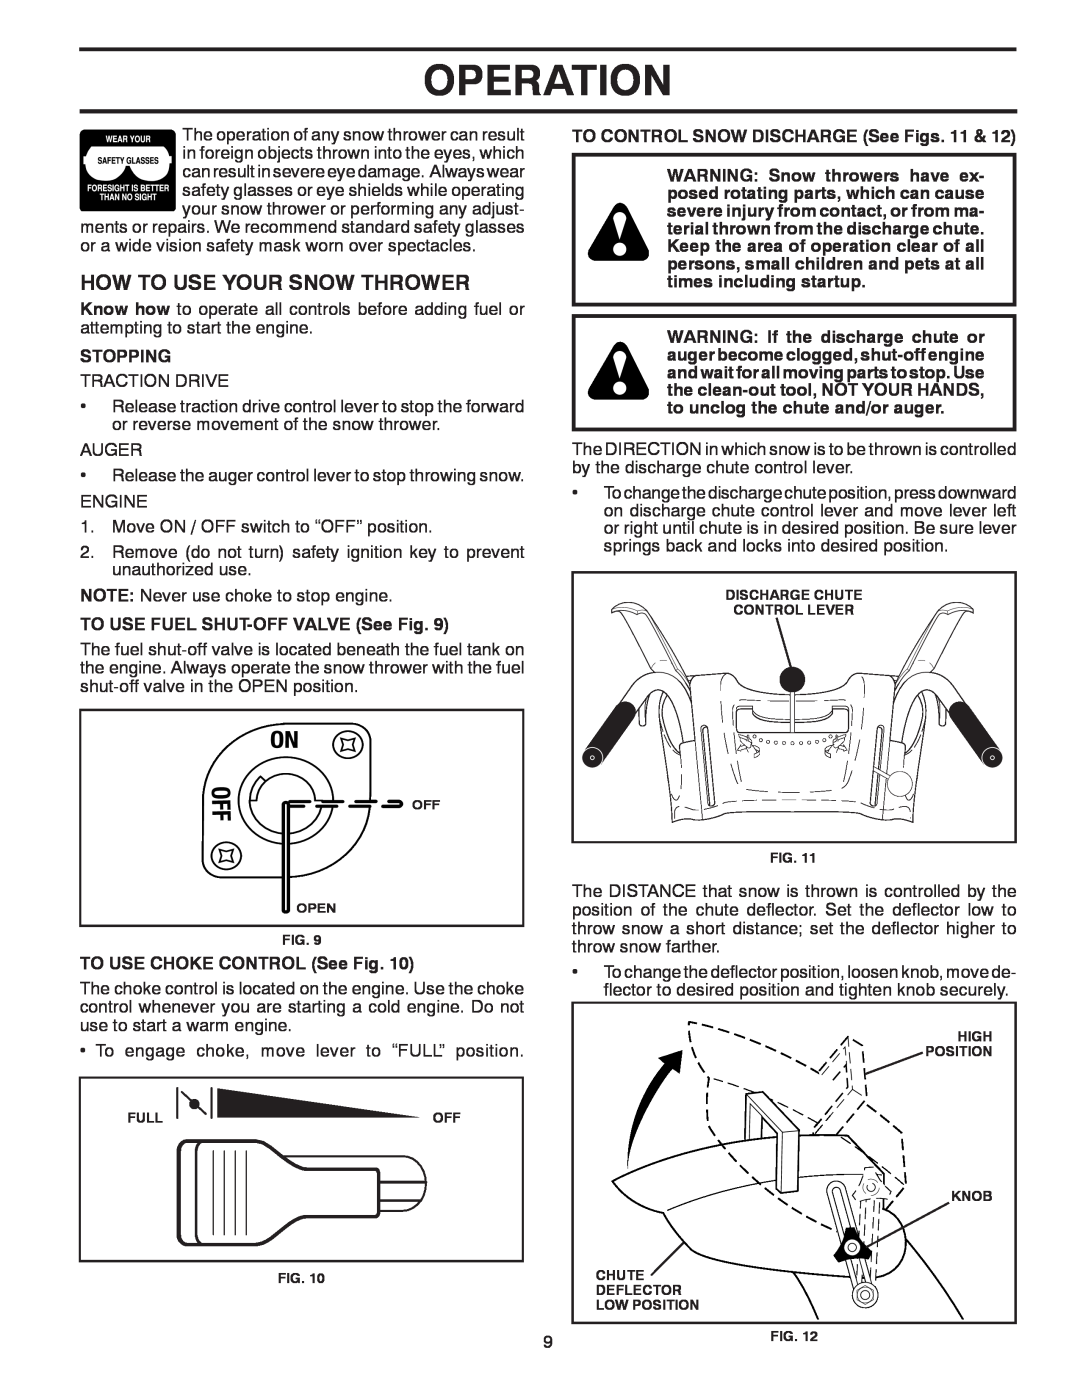 McCulloch 96192004001 owner manual How To Use Your Snow Thrower, Operation, Stopping, TO USE FUEL SHUT-OFF VALVE See Fig 